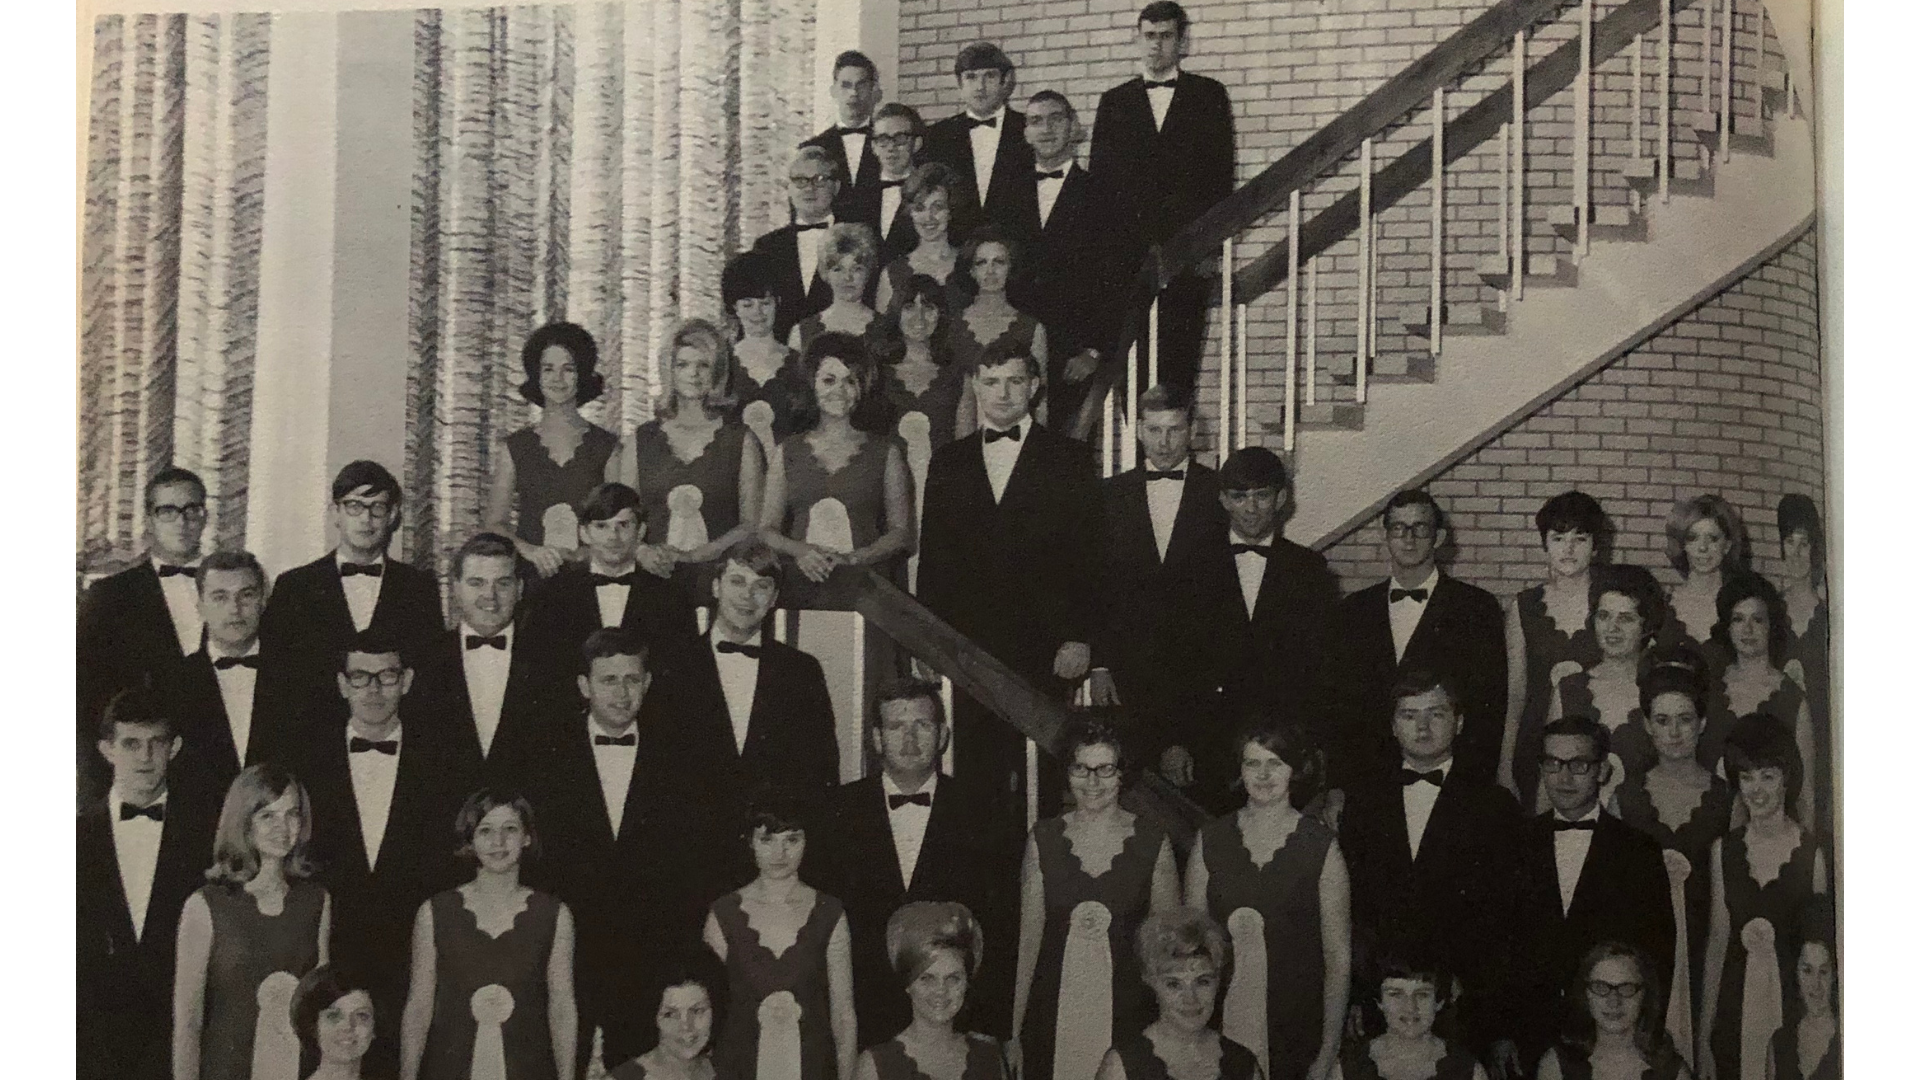 Historical photograph of an A-State choir around the grand staircase in the front of the Fine Arts Center.  Students are wearing their two toned dresses and tuxes.